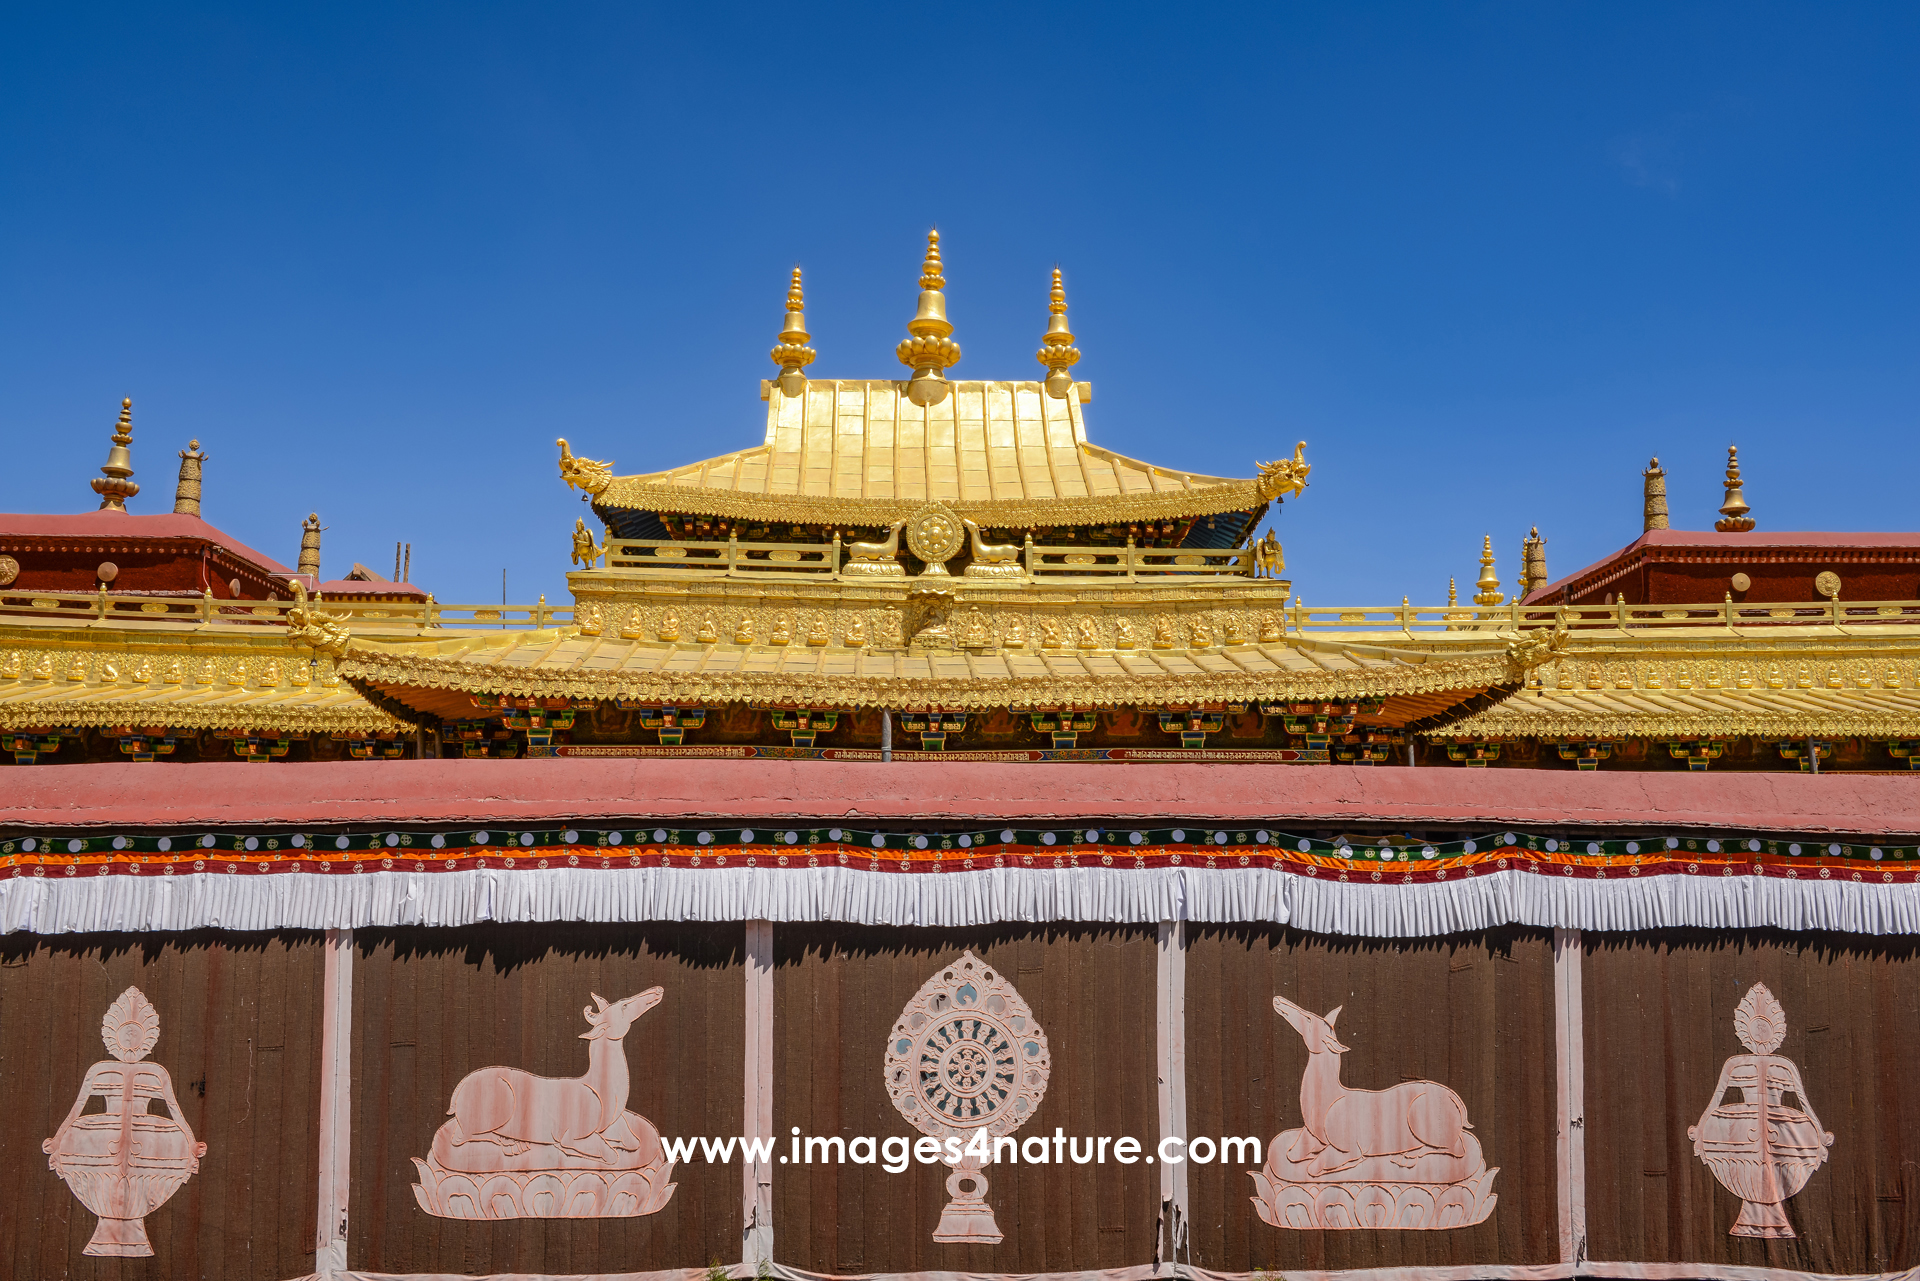 Close-up on wall with religious symbols and golden rooftop within the Jokhang Temple in Lhasa